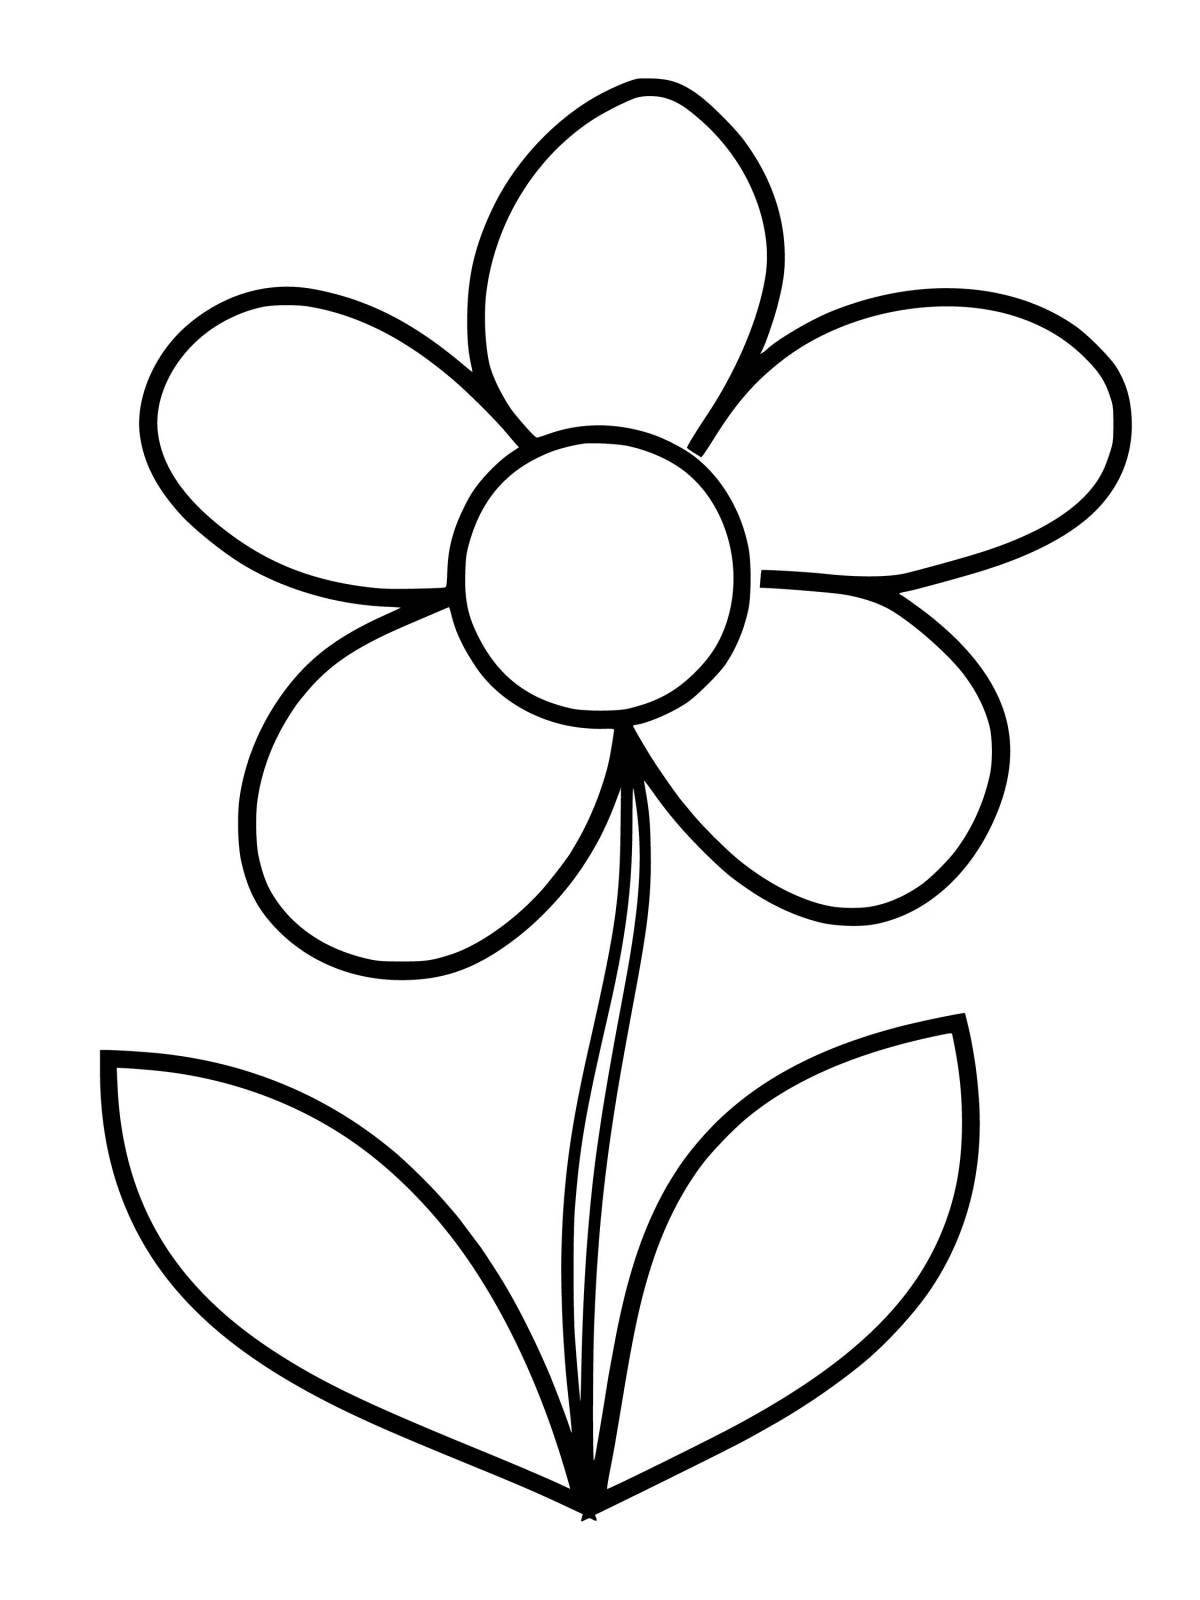 Coloring book shiny simple flower